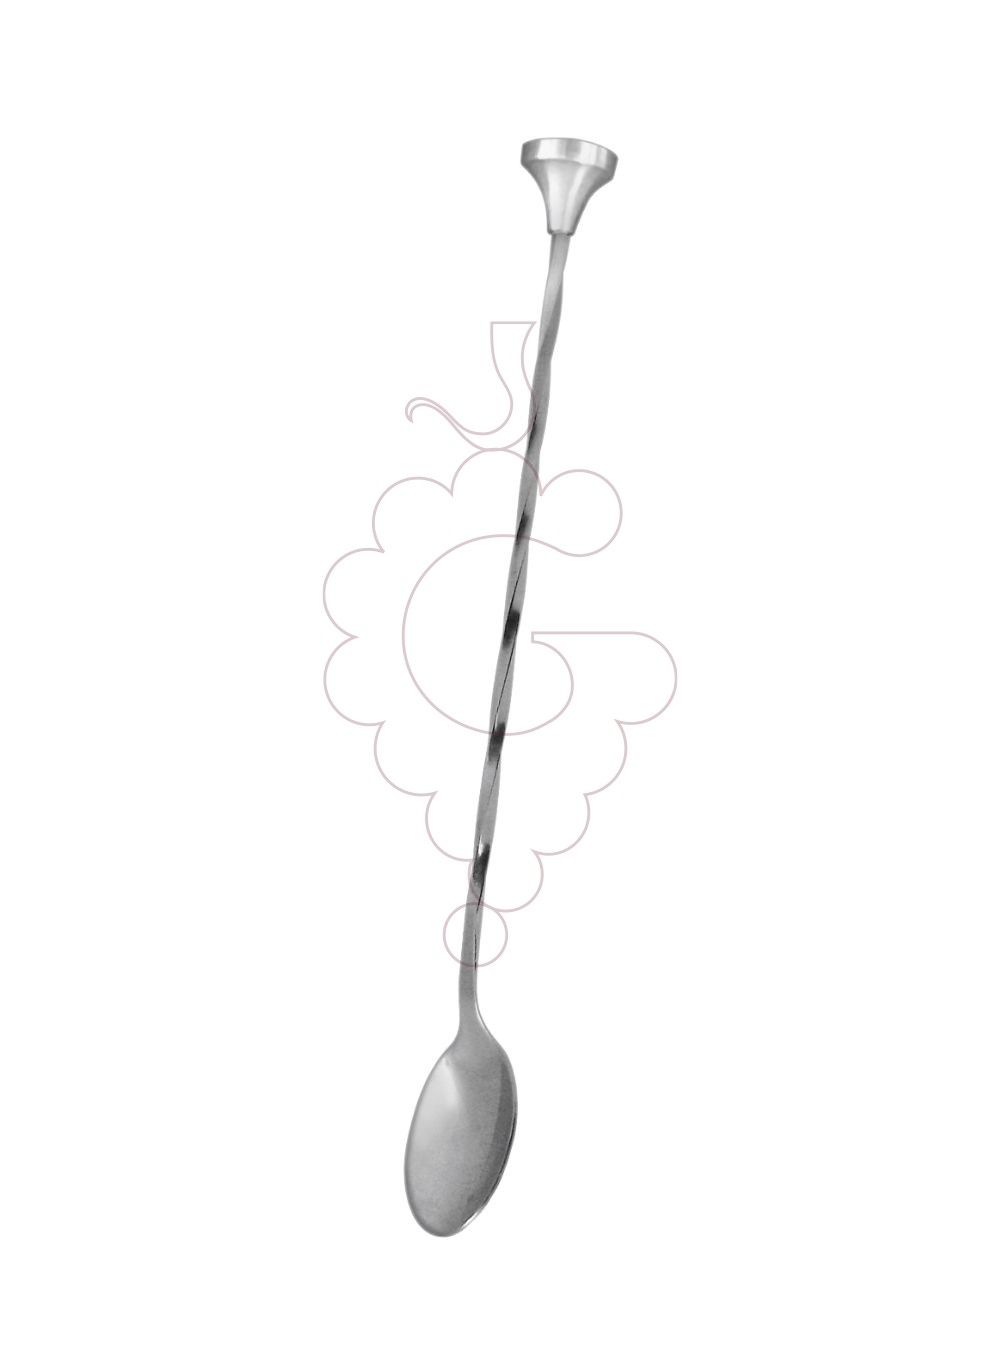 Photo Accessories Gin Tonic Spoon